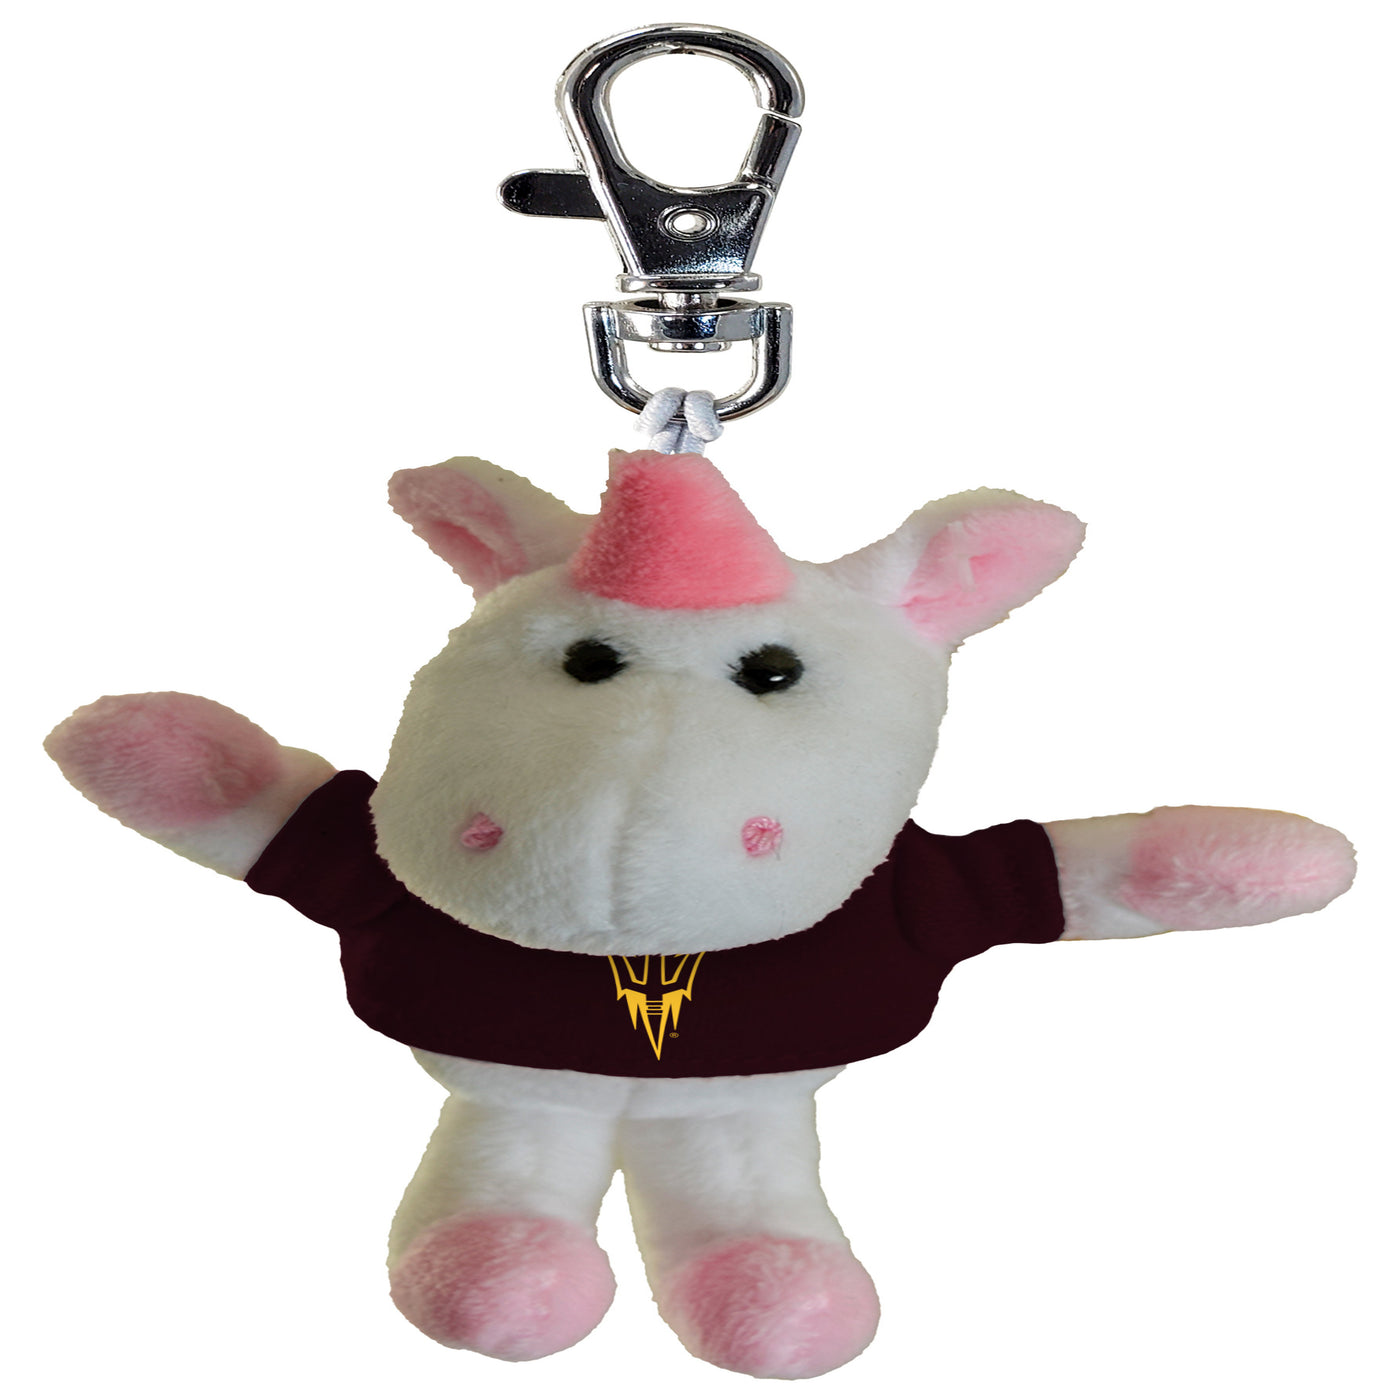 ASU key chain of a small white and pink unicorn wearing a maroon shirt with pitchfork gold outline on the chest of the shirt.